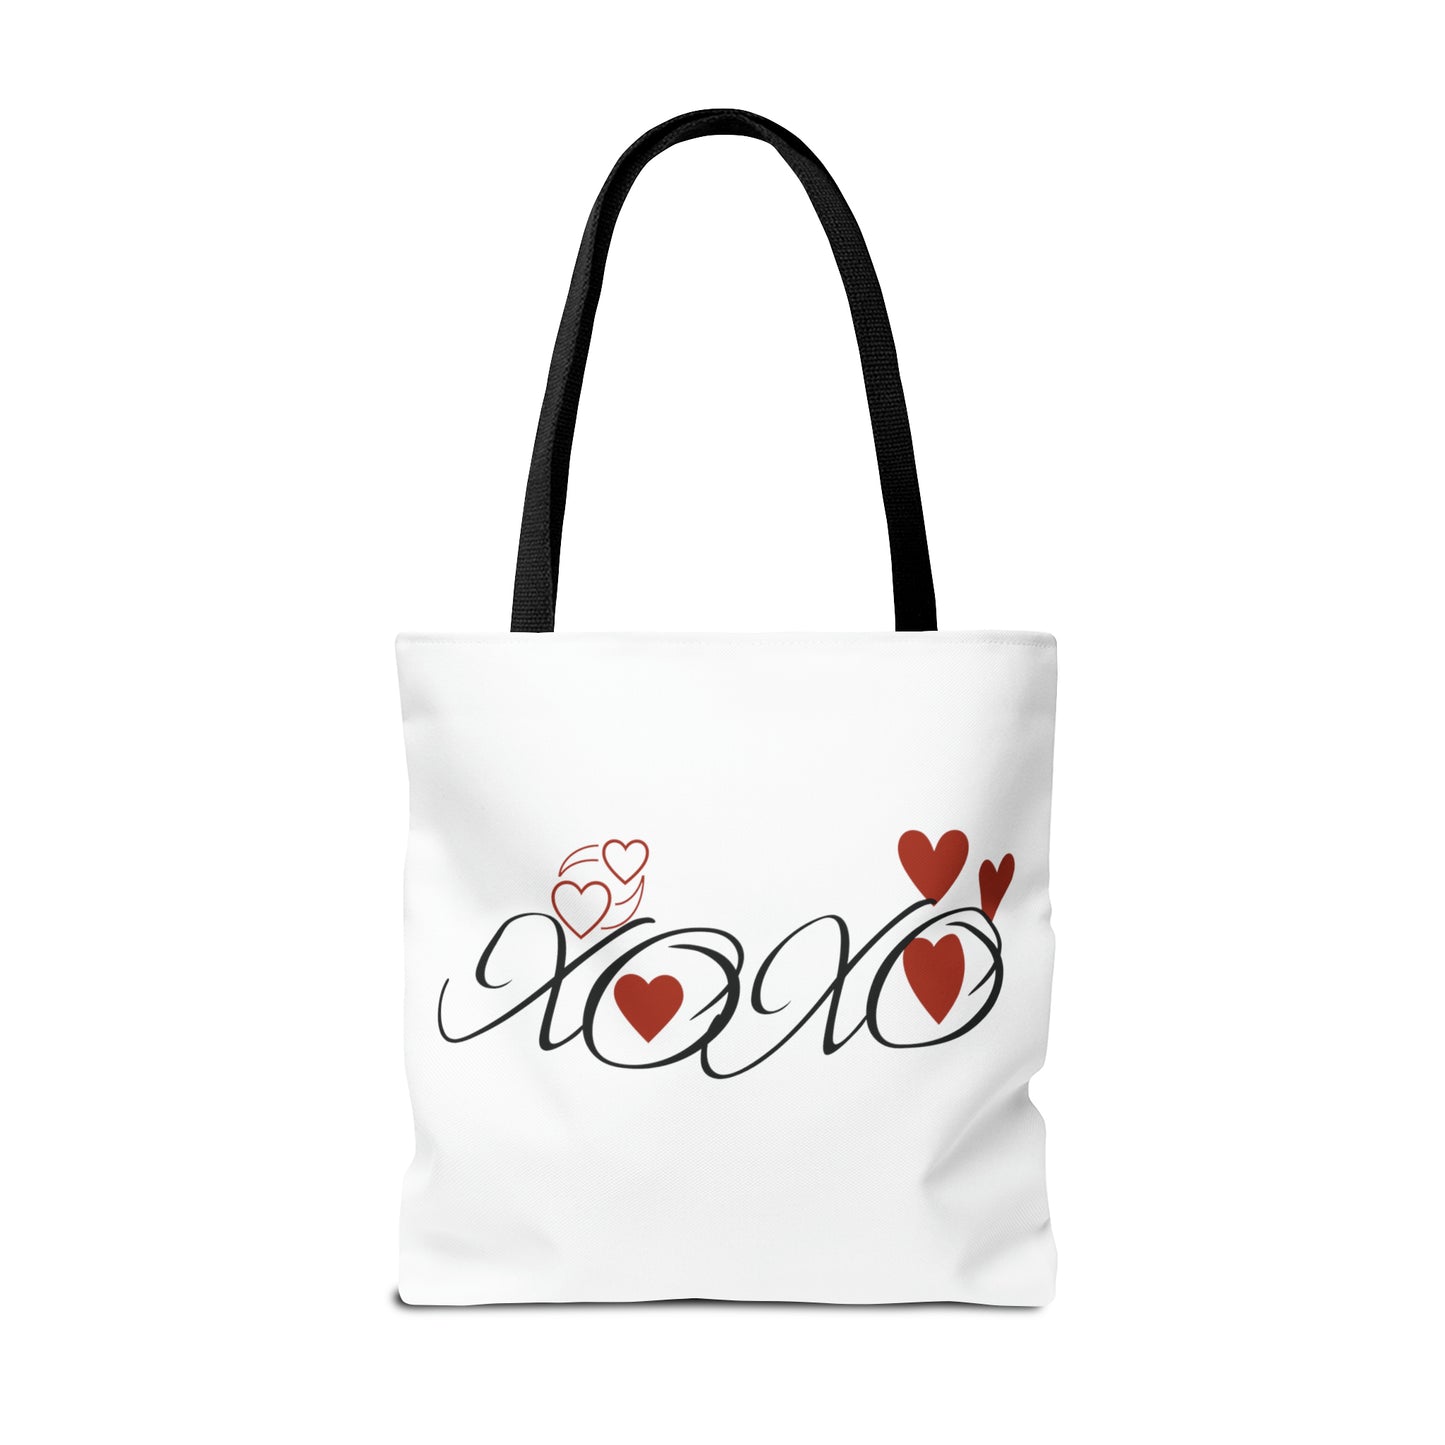 Valentine: XOXO with Hearts - Tote Bag (AOP)